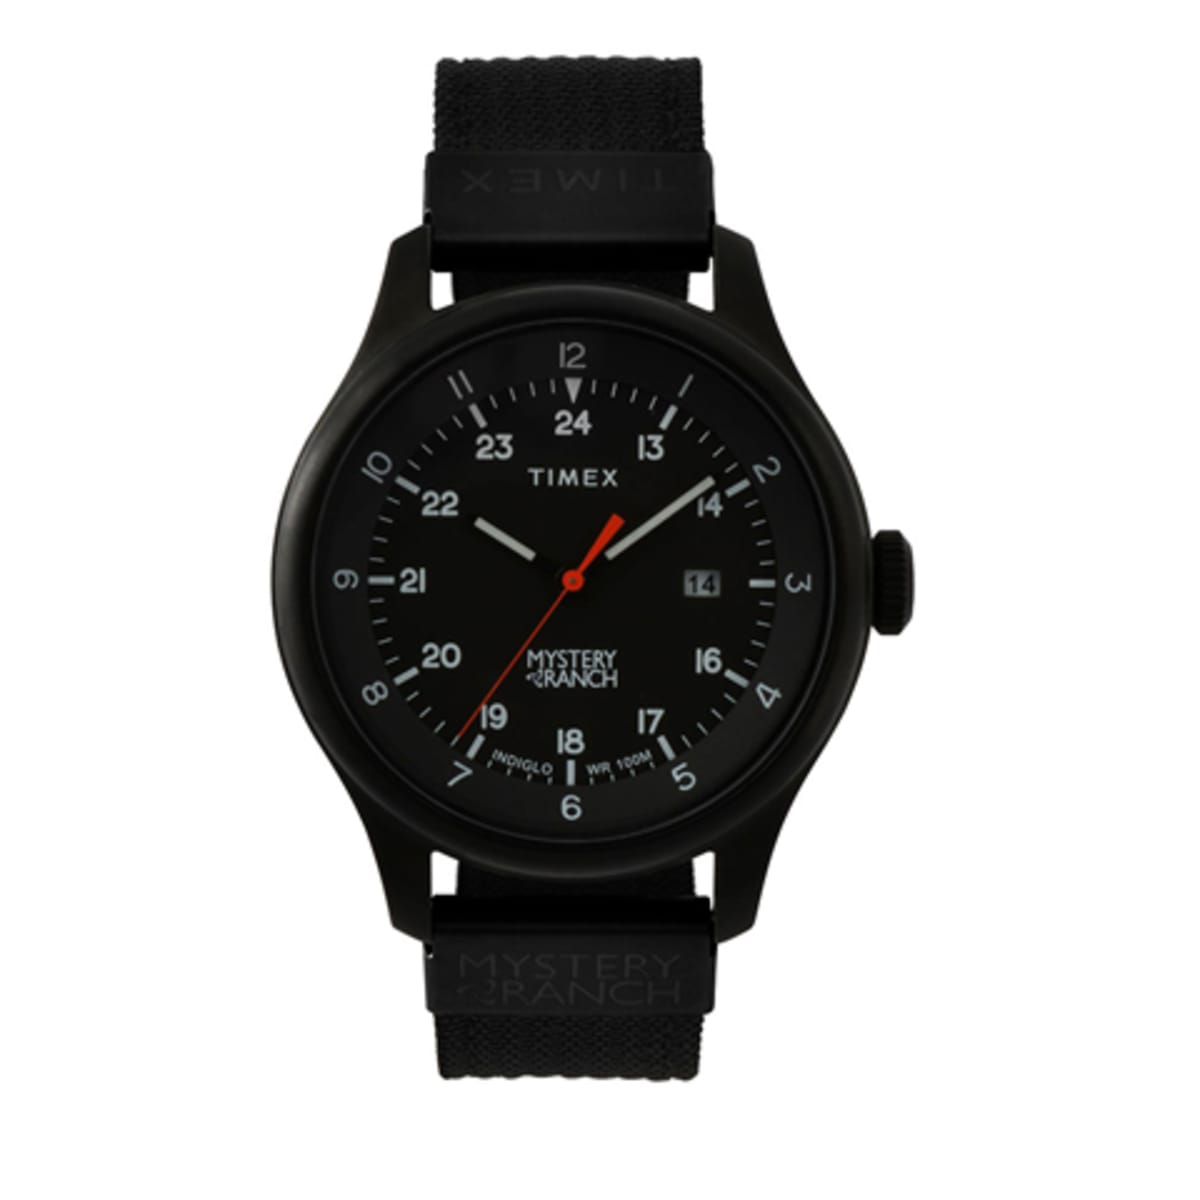 Timex Japan releases a watch with cult bag brand, Mystery Ranch 